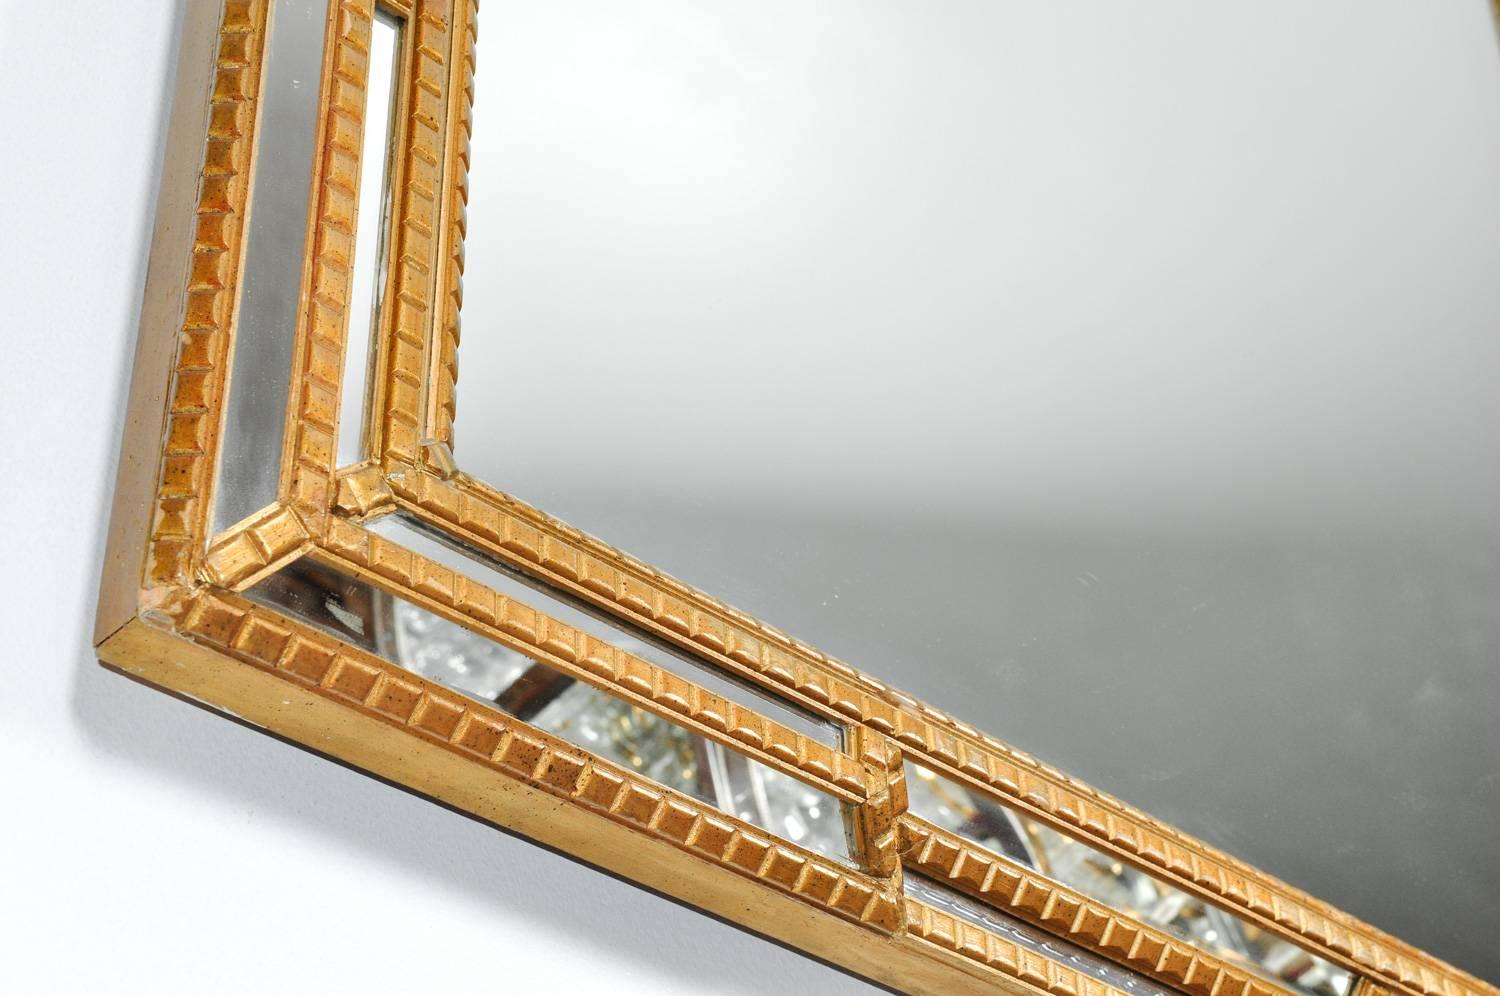 Giltwood frame beveled hanging wall mirror. Excellent condition. This piece would bring a great addition to any entrance, fireplace and study. The hanging wall mirror measure 58 inches length x 40 inches width x 3 inches deep.